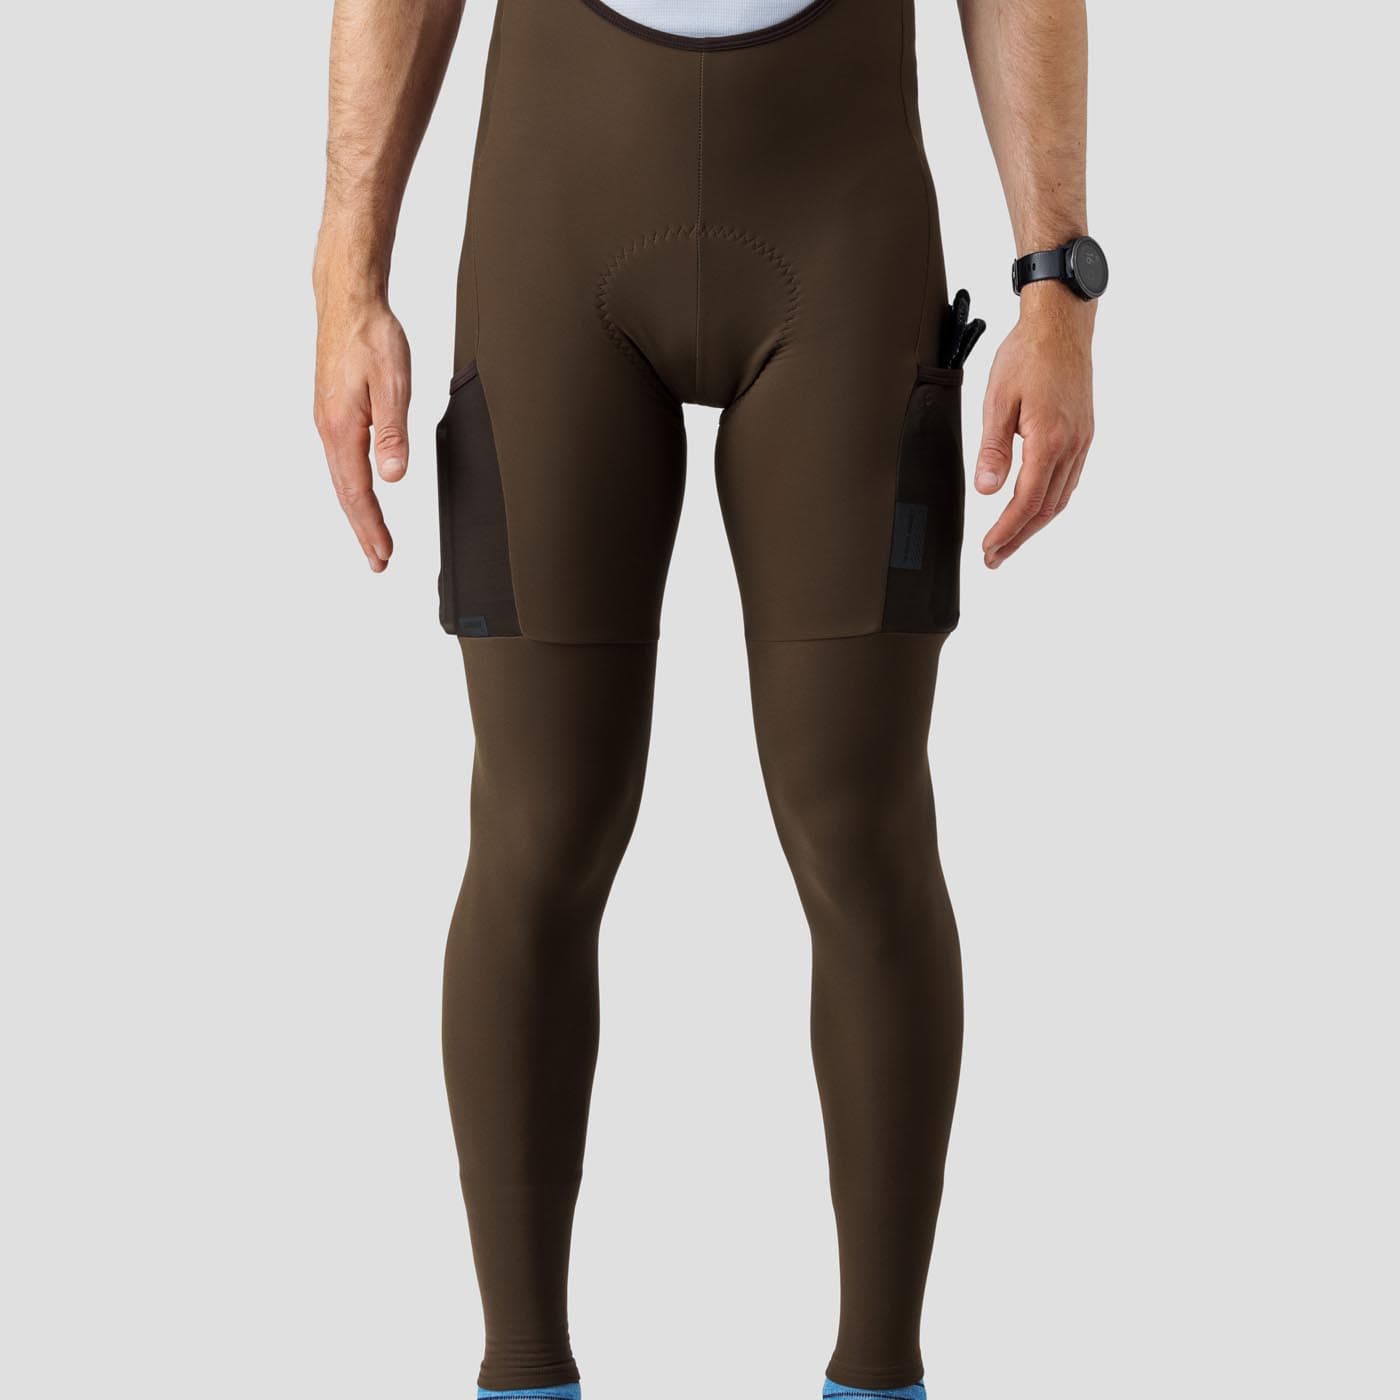 Buy Black Fleece Lined Thermal Tights from Next Sweden